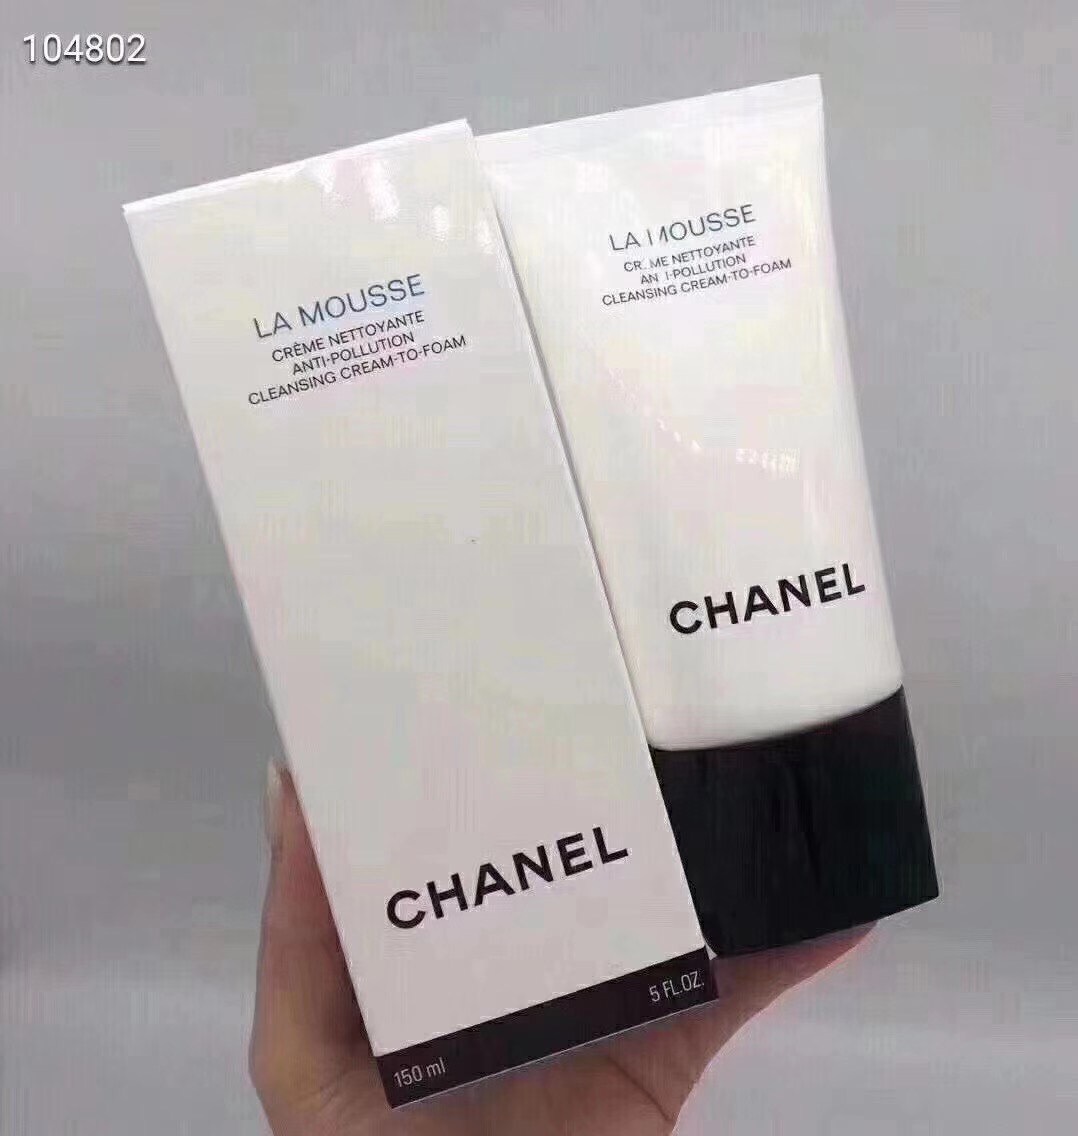 CHANEL La Mousse Anti-Pollution Cleansing Cream-To-Foam 150ml.ครีม